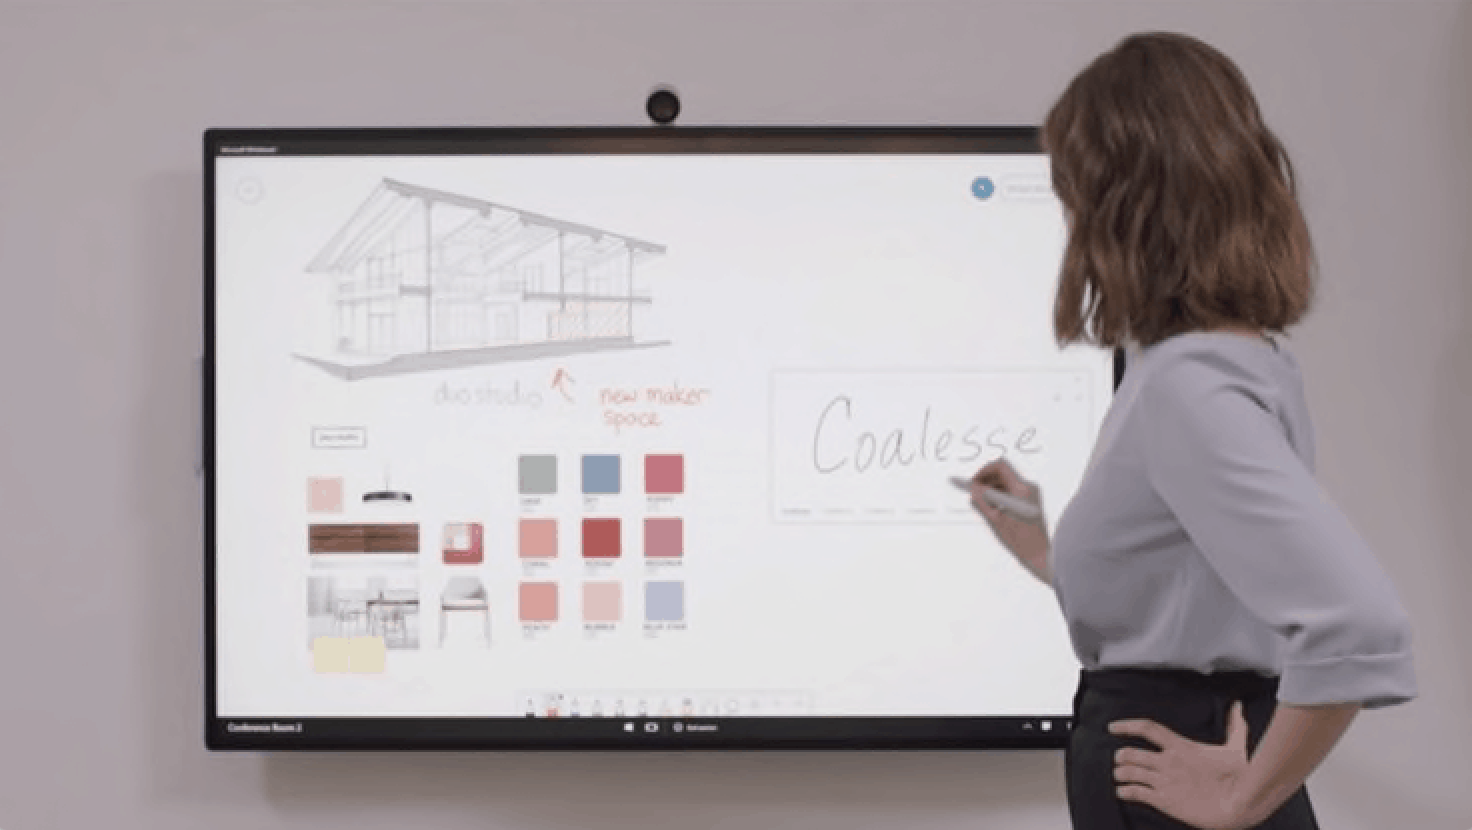 Listings for the surface hub 2 pen and camera appear in the microsoft store - onmsft. Com - july 17, 2019